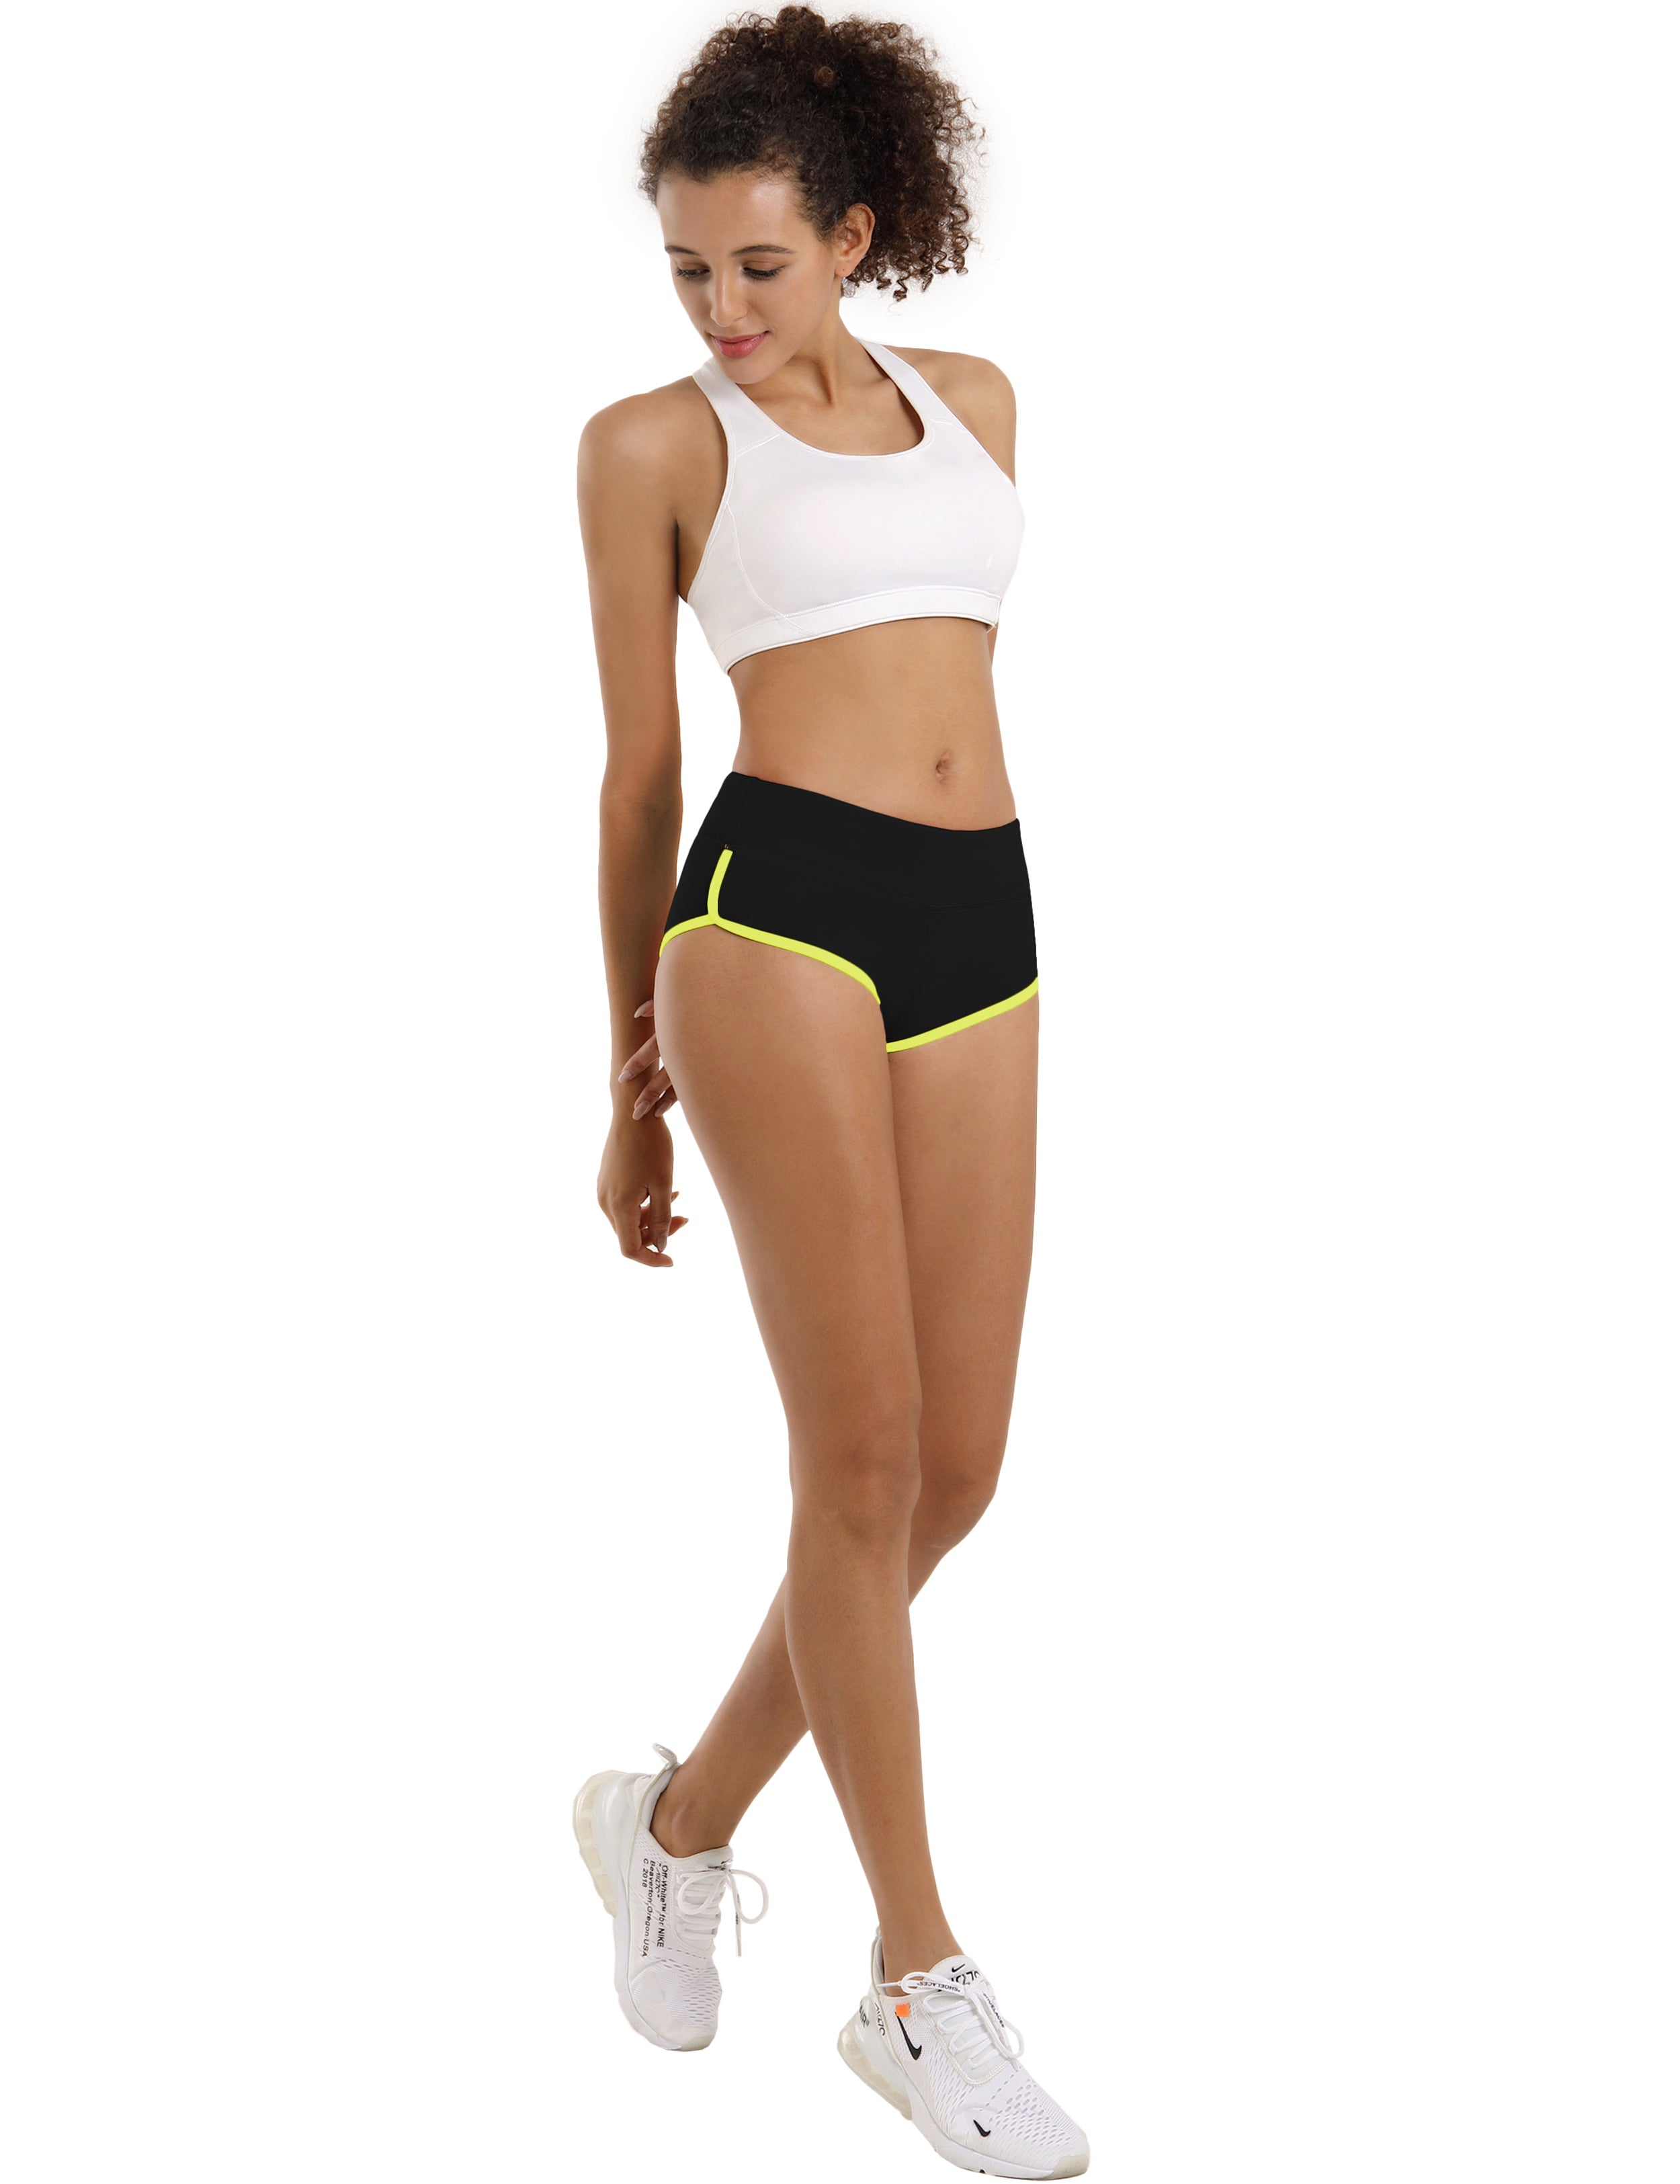 Sexy Booty Yoga Shorts black_fluorescentyellow Sleek, soft, smooth and totally comfortable: our newest sexy style is here. Softest-ever fabric High elasticity High density 4-way stretch Fabric doesn't attract lint easily No see-through Moisture-wicking Machine wash 75%Nylon/25%Spandex